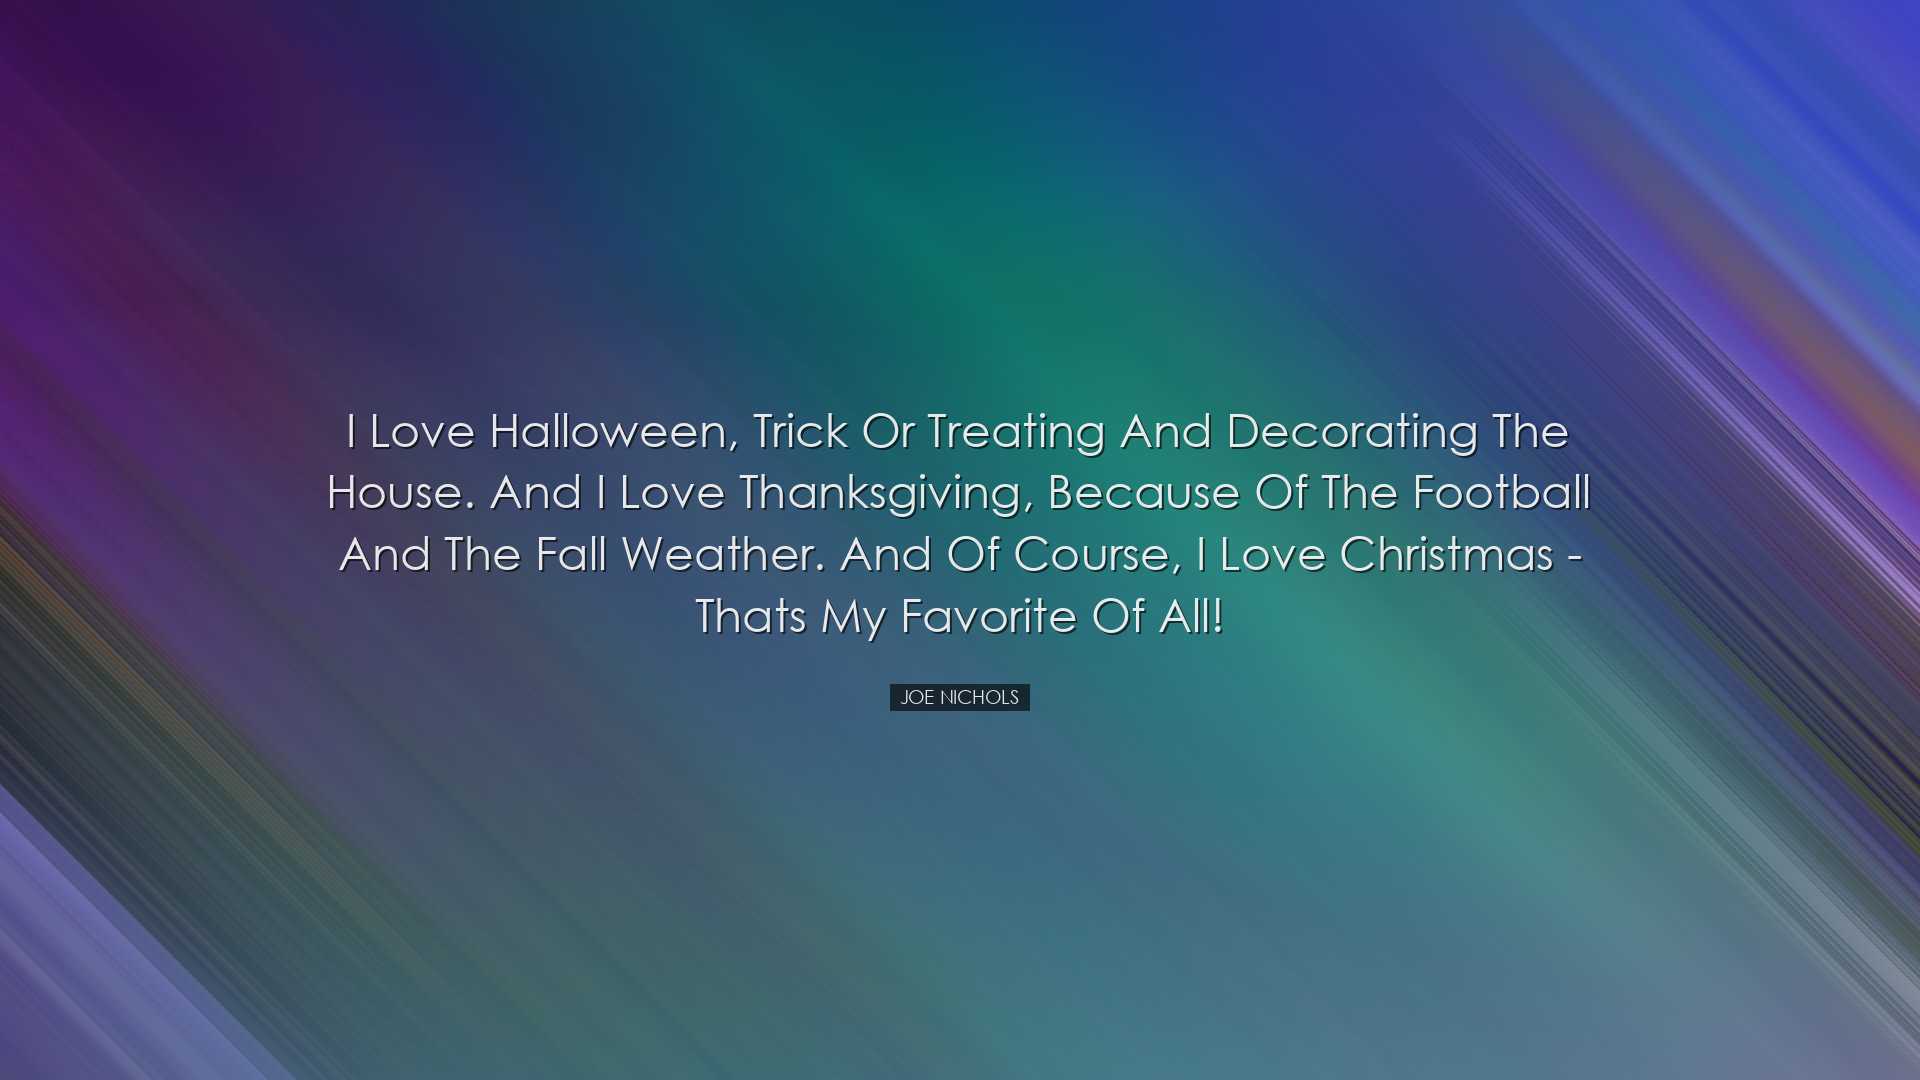 I love Halloween, trick or treating and decorating the house. And